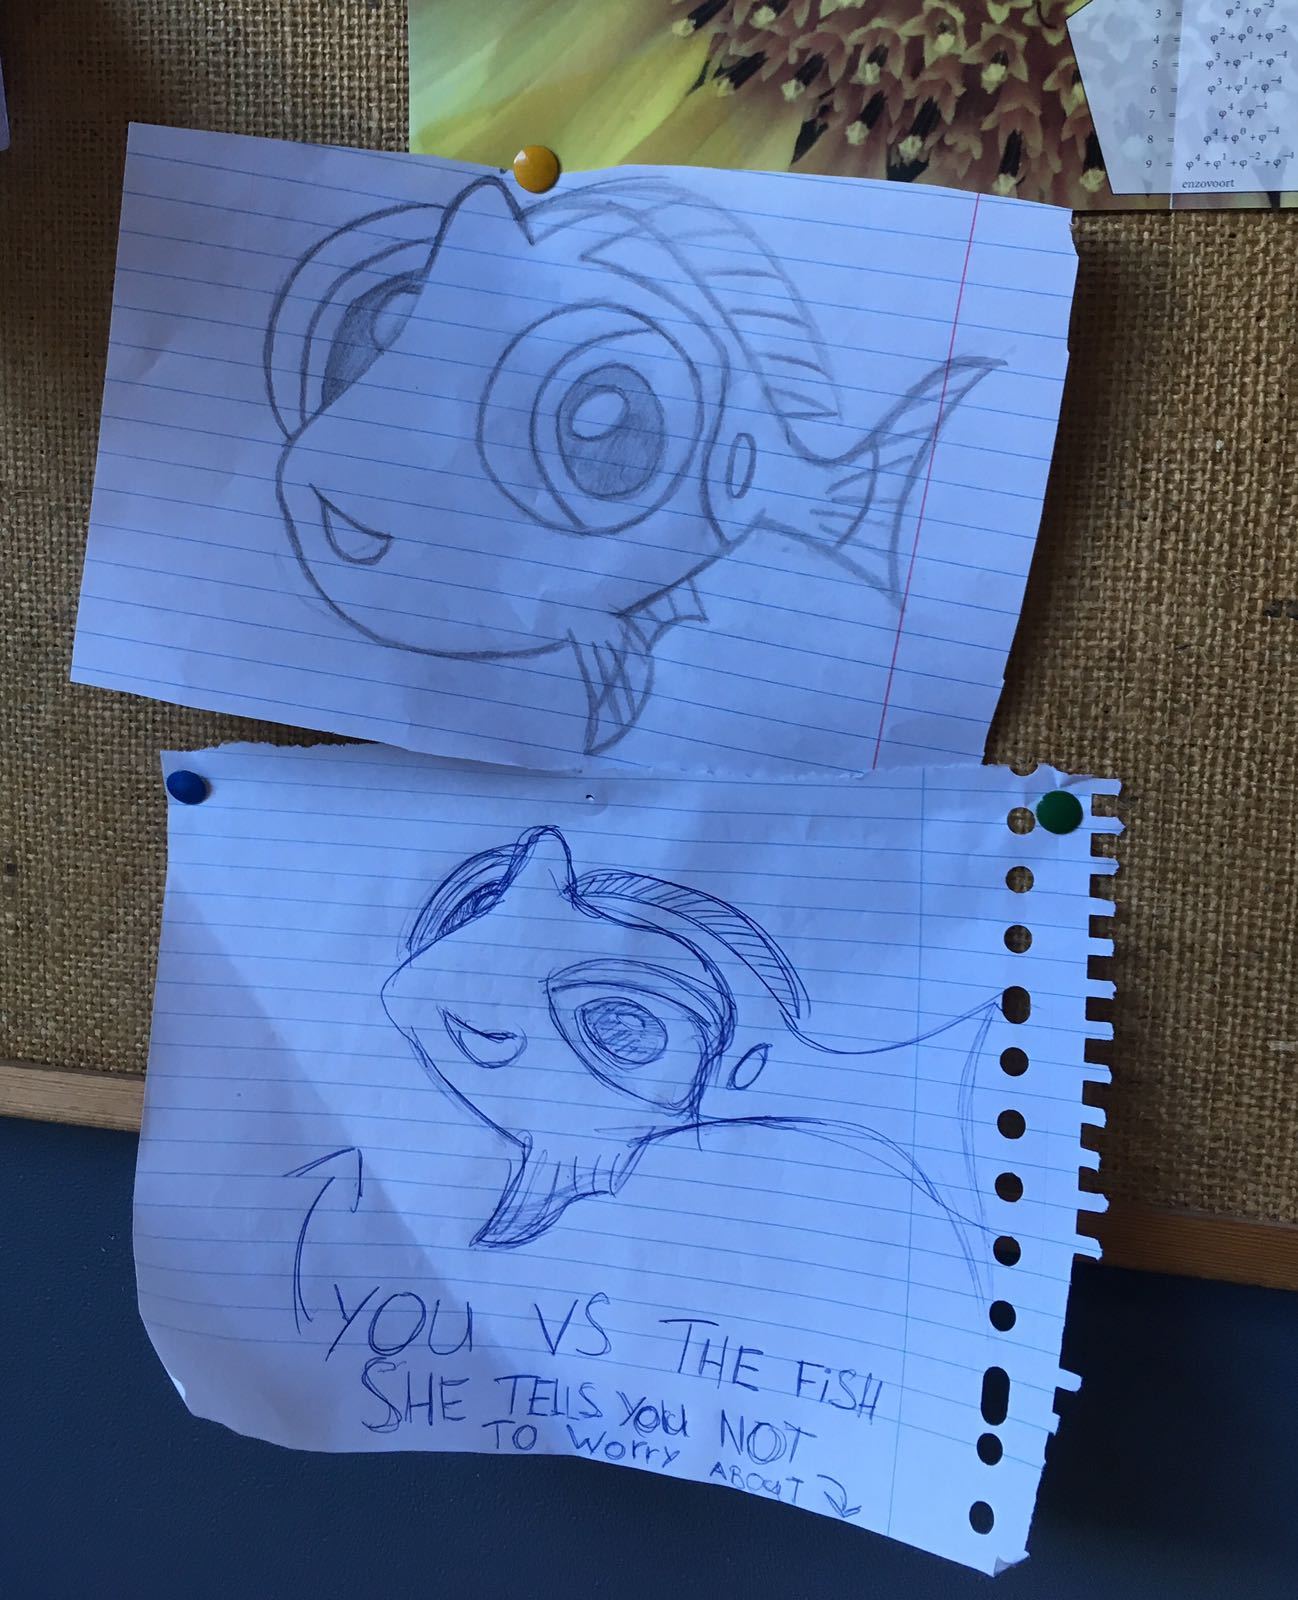 So this was in a class room - meme